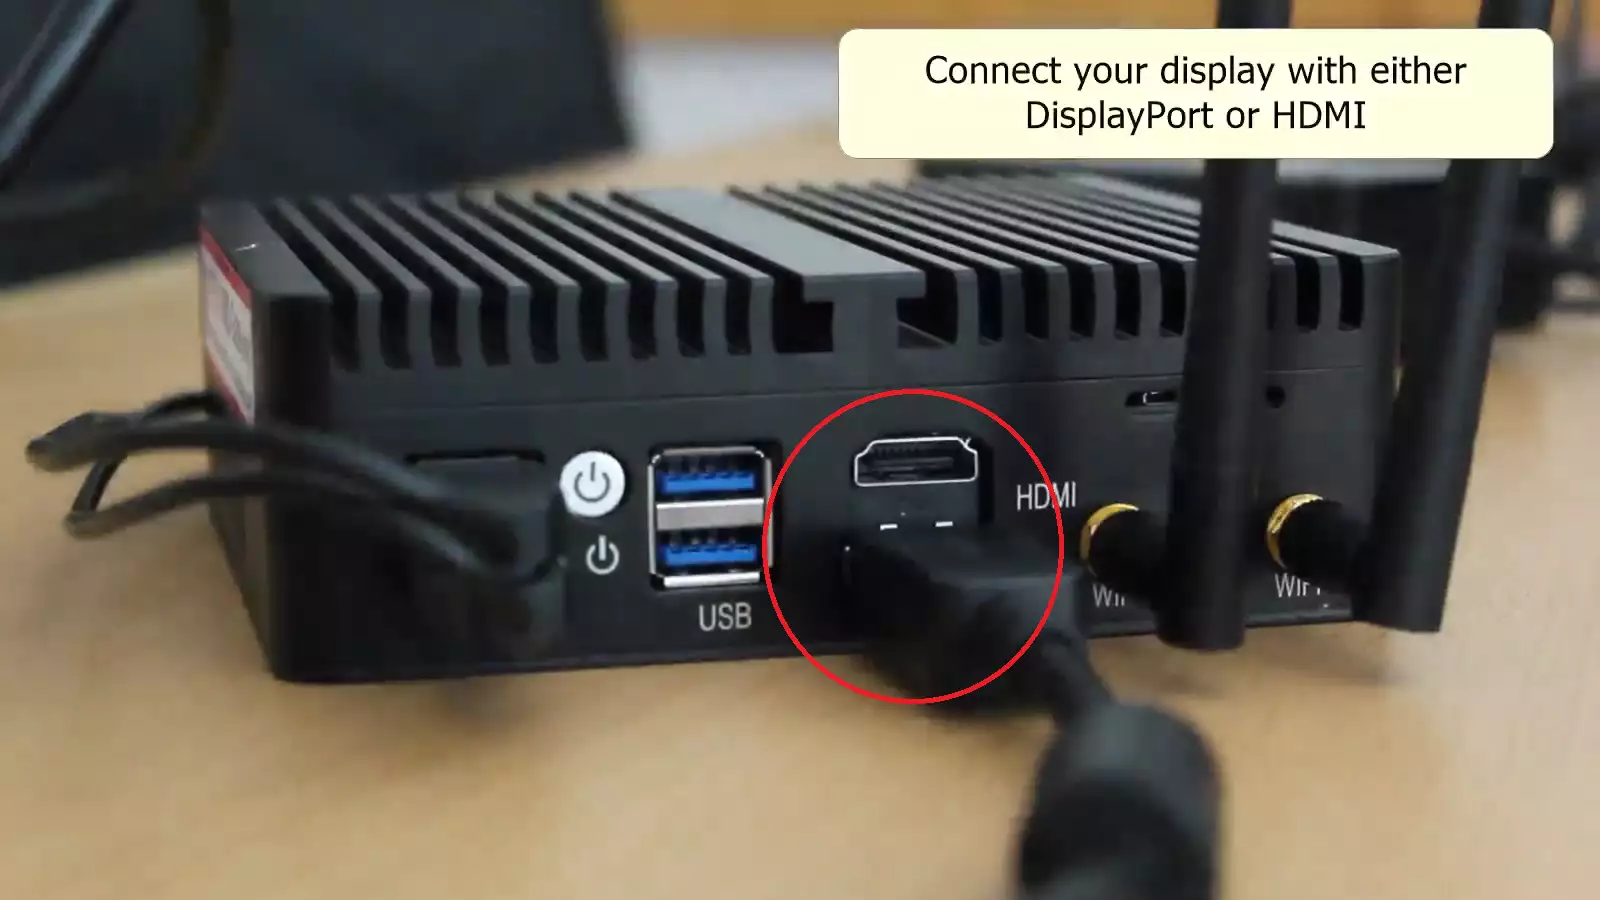 connect your display via the hdmi or displayport connectors